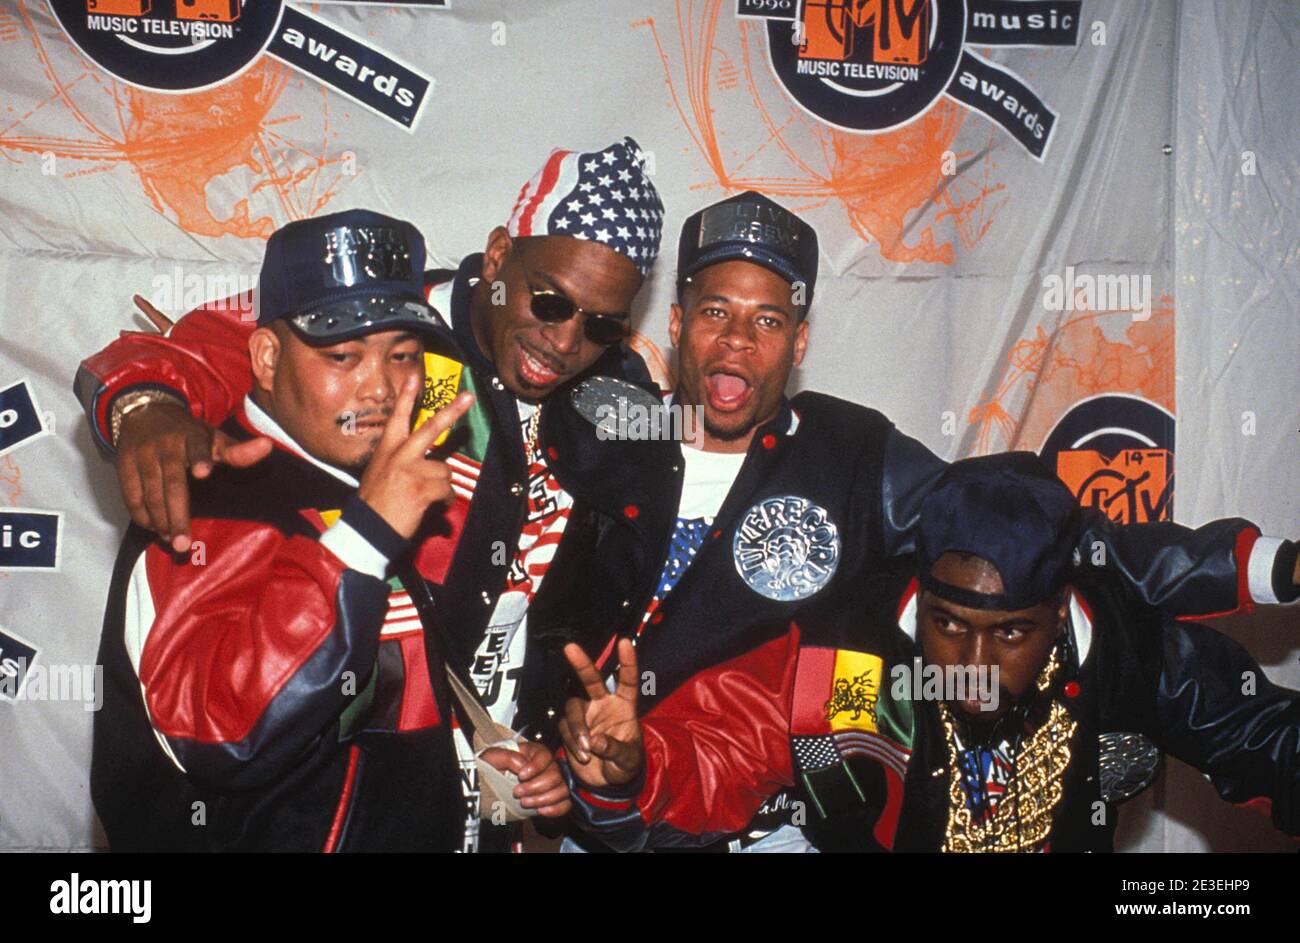 Luther 'Luke' Campbell and 2 LIVE CREW at the 1990 MTV Video Music ...